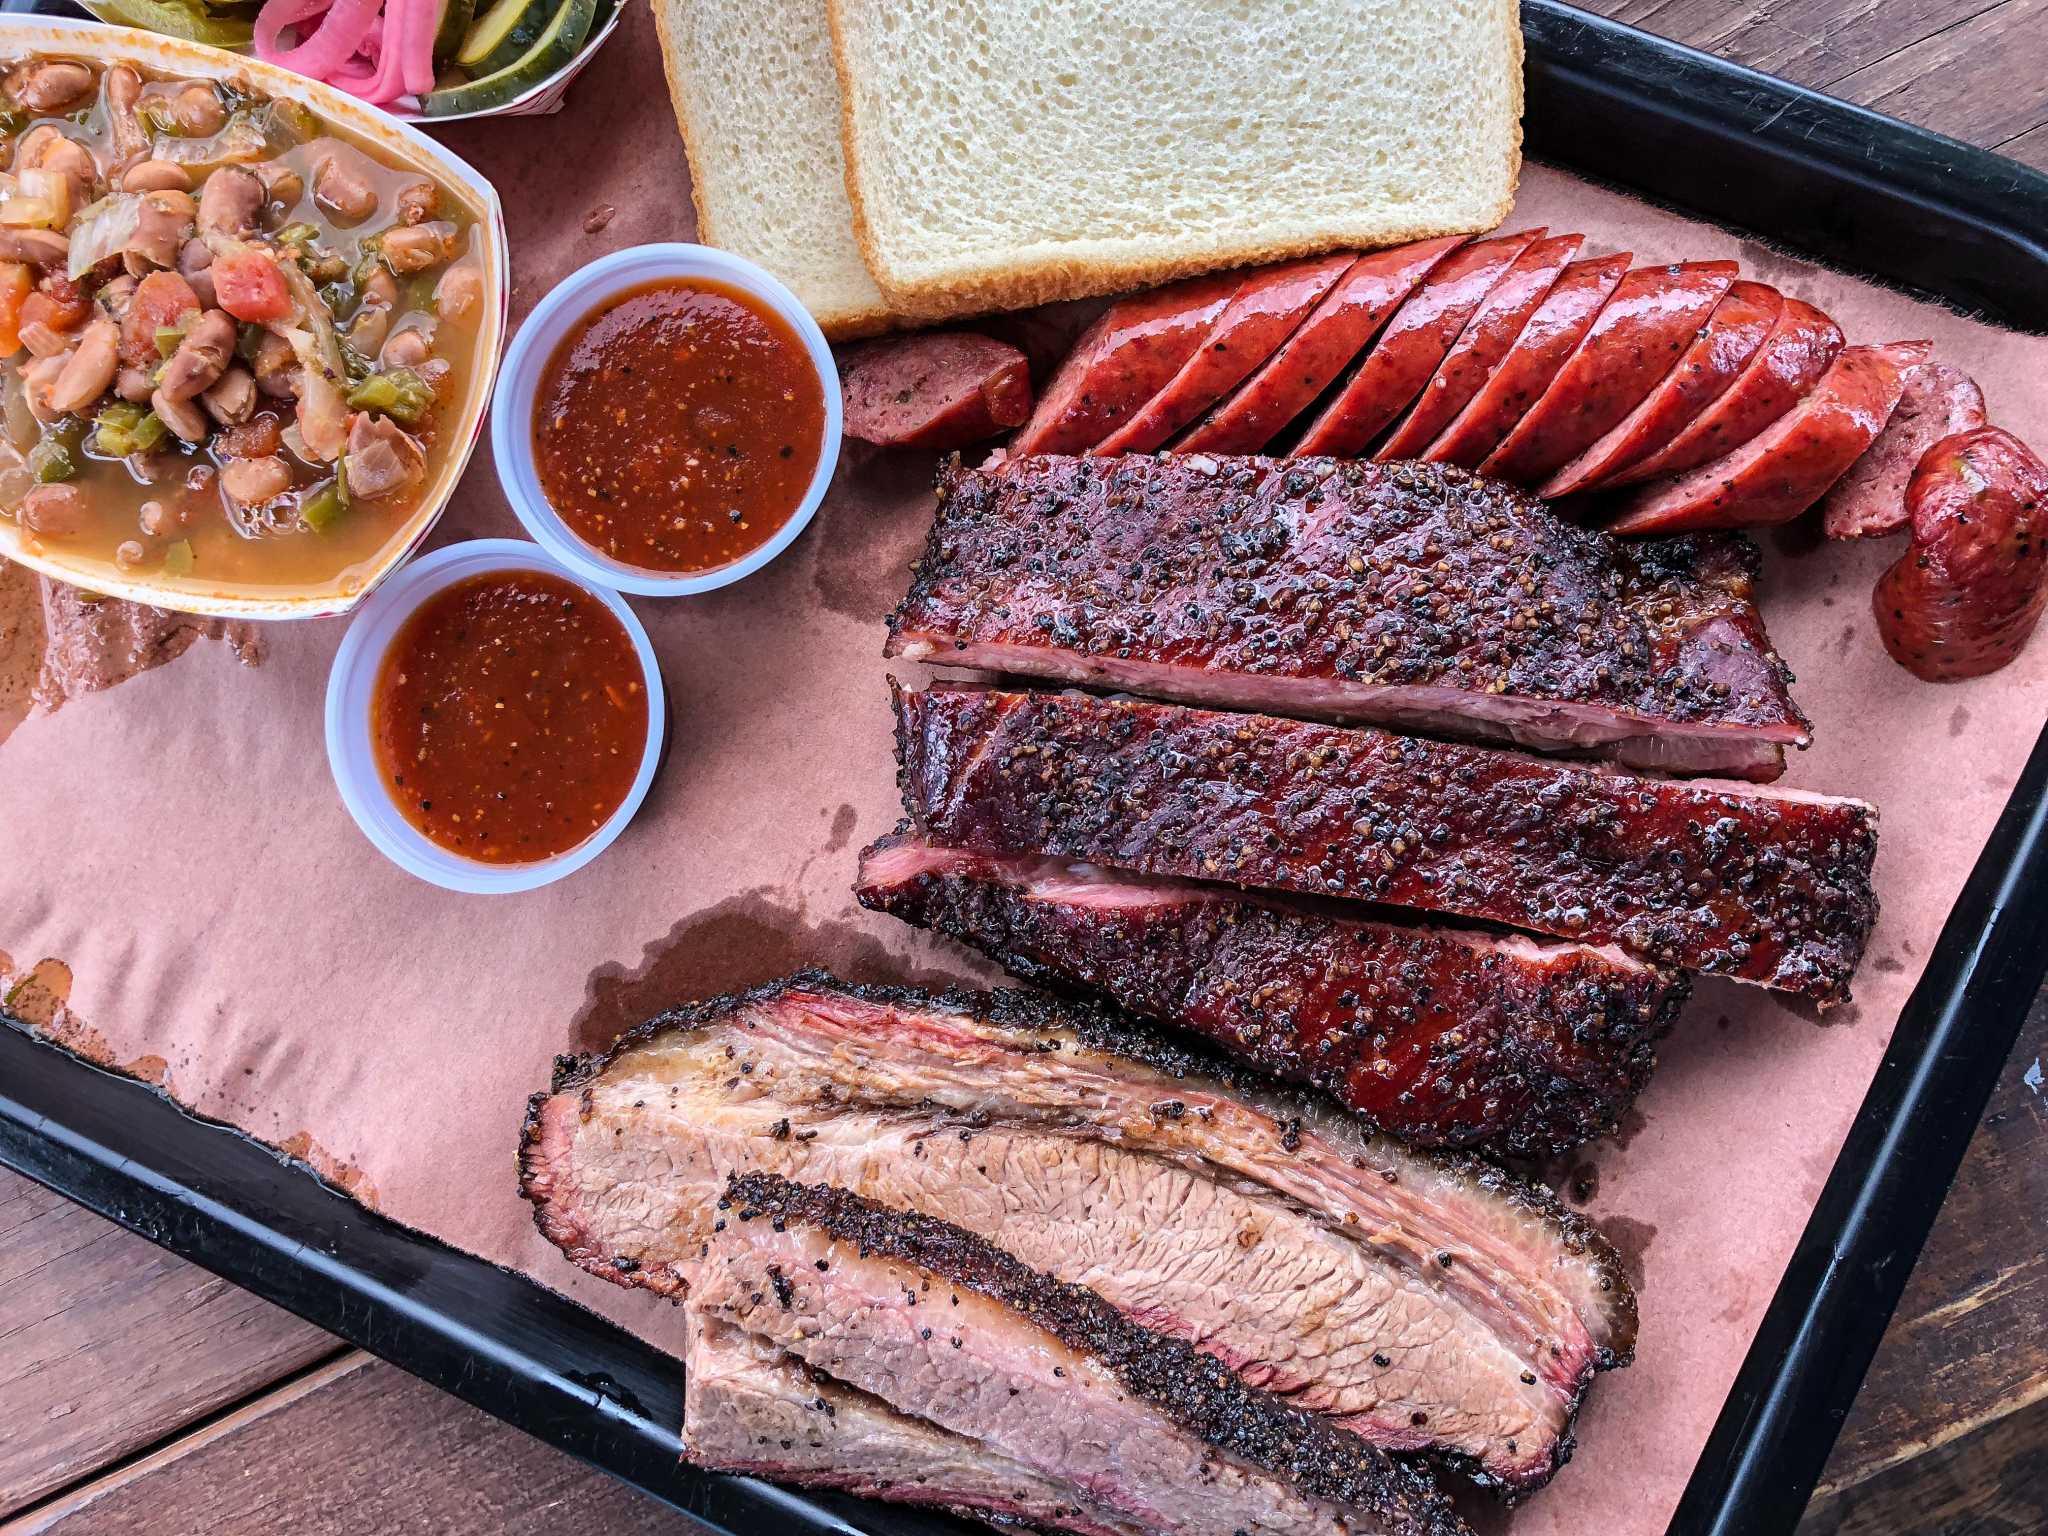 Sale > texas barbecue ribs > in stock